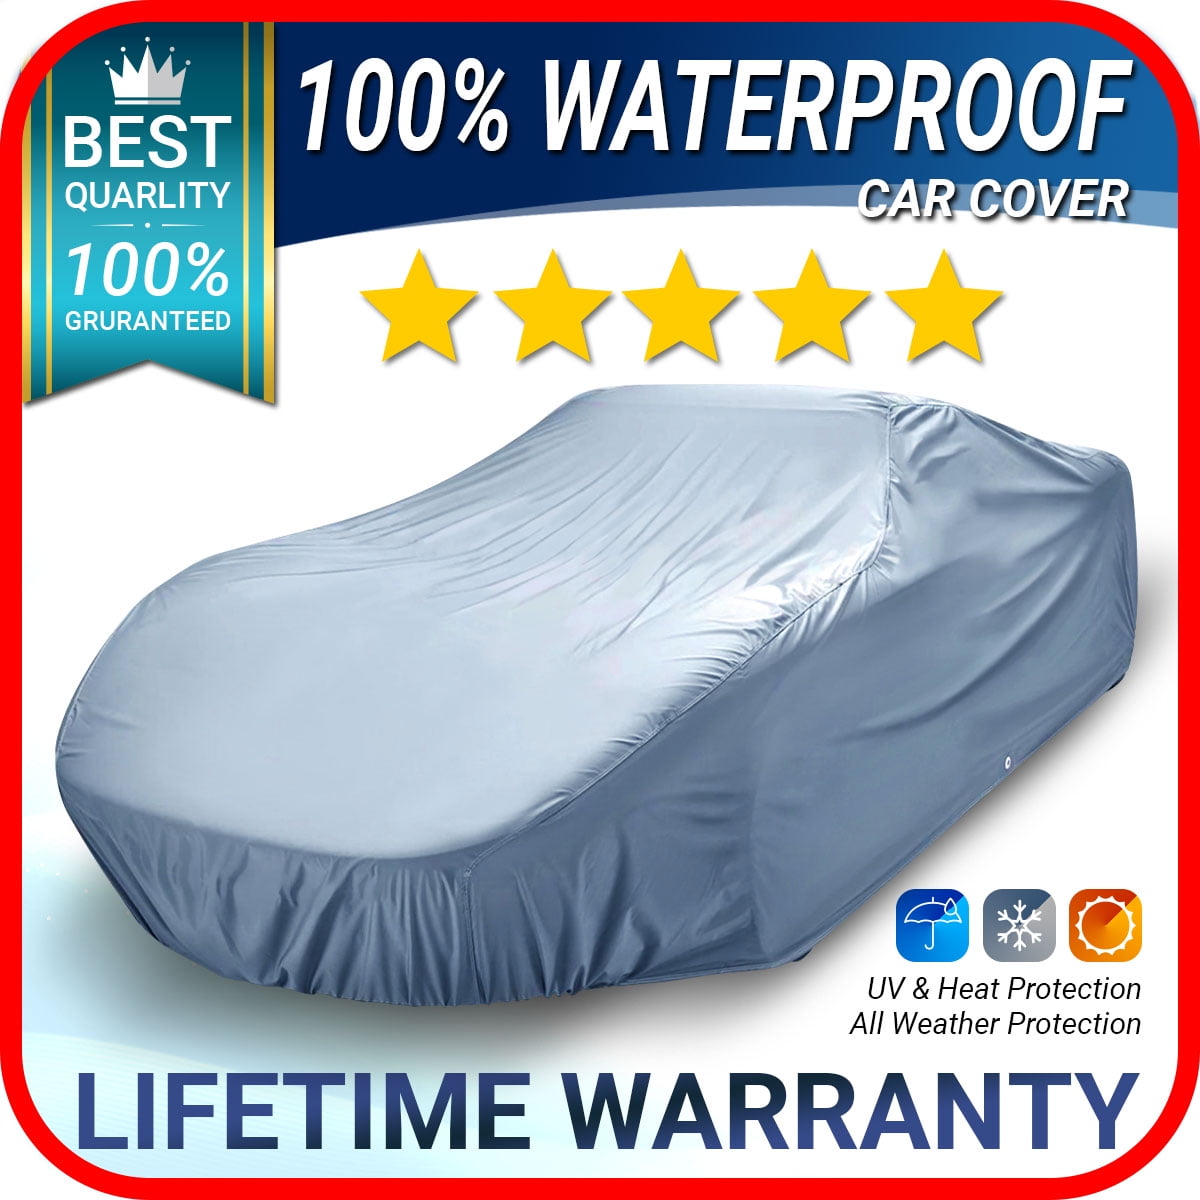 Chevy Malibu 4 Layer Car Cover Fitted In Out door Water Proof Rain Snow Sun Dust 